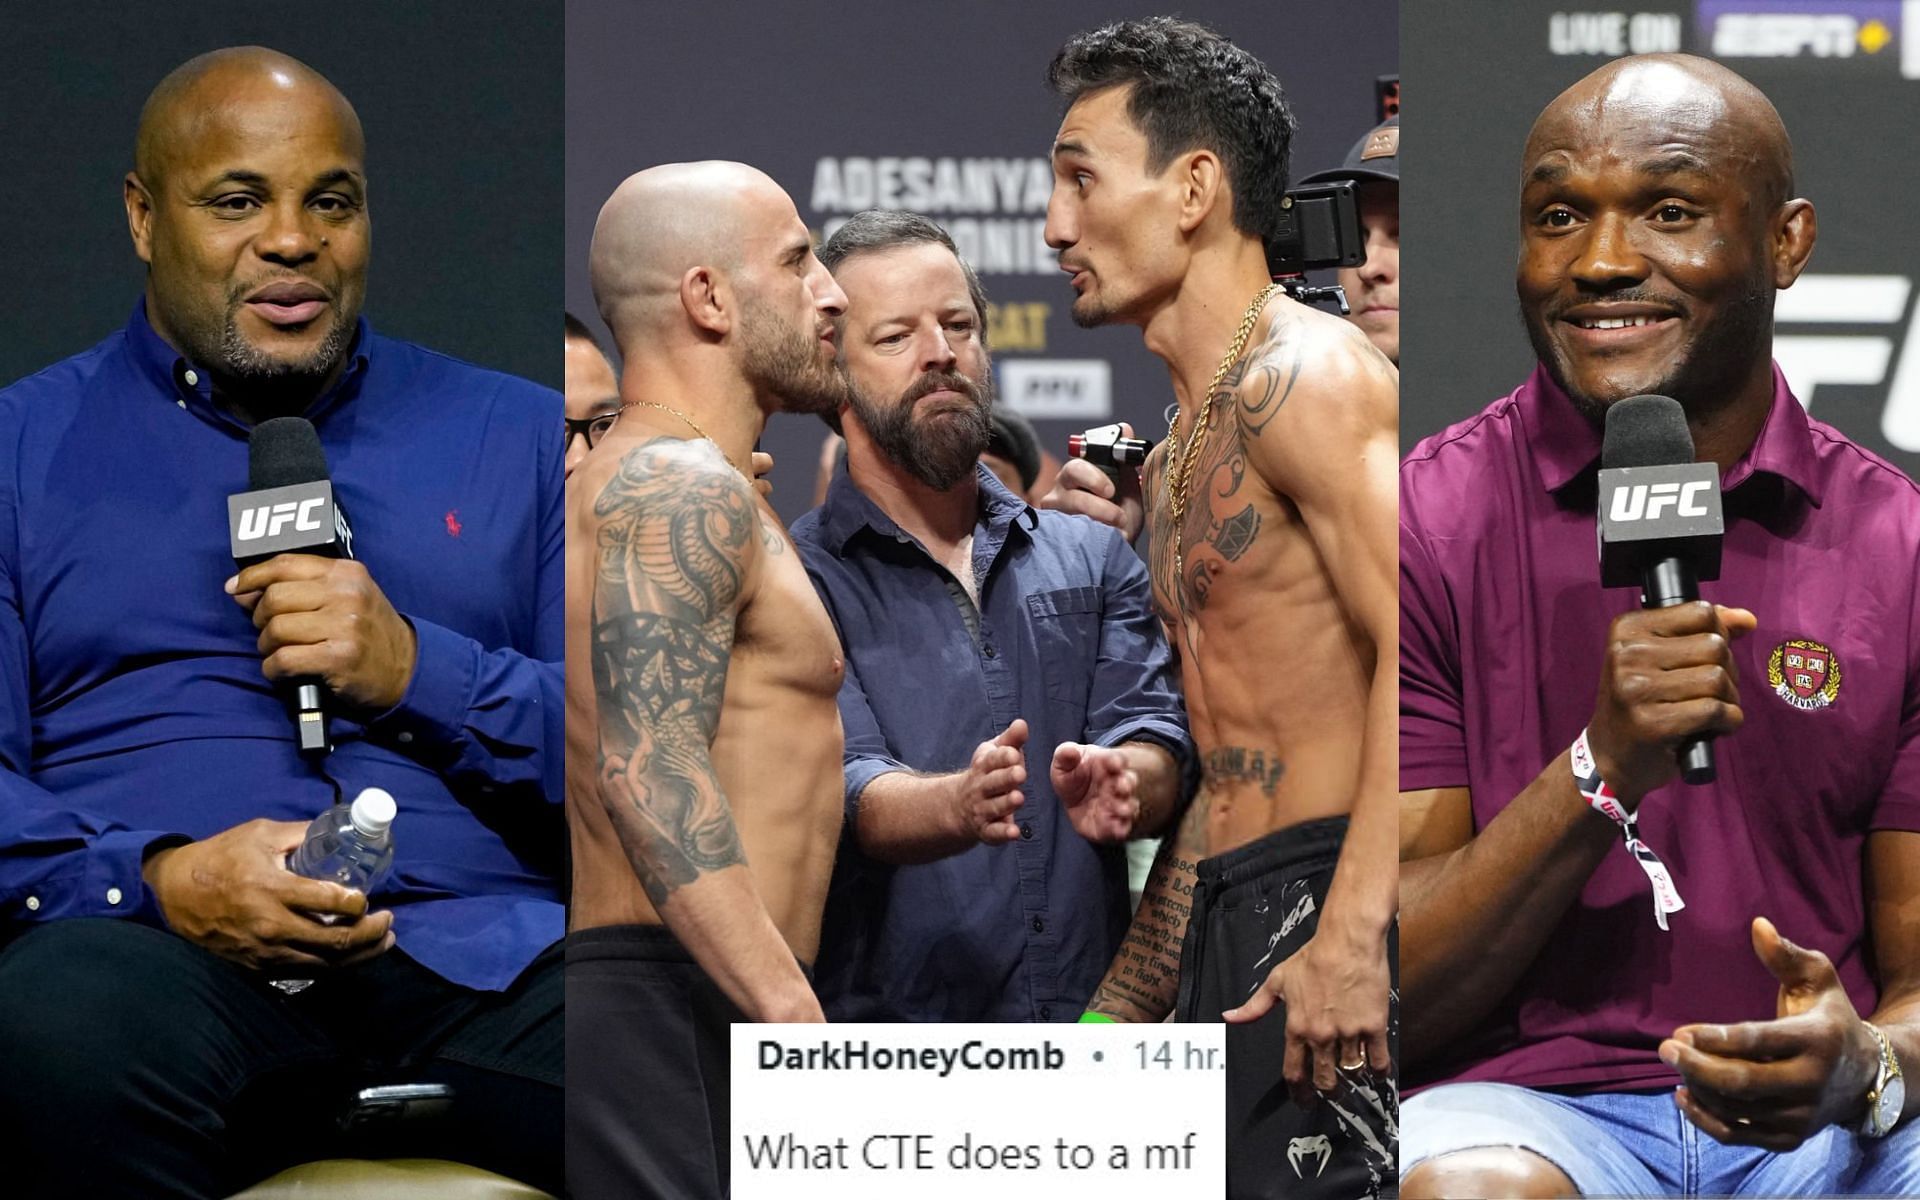 Daniel Cormier (left), Alexander Volkanovski and Max Holloway (middle) and Kamaru Usman (right) [Images Courtesy: @GettyImages]